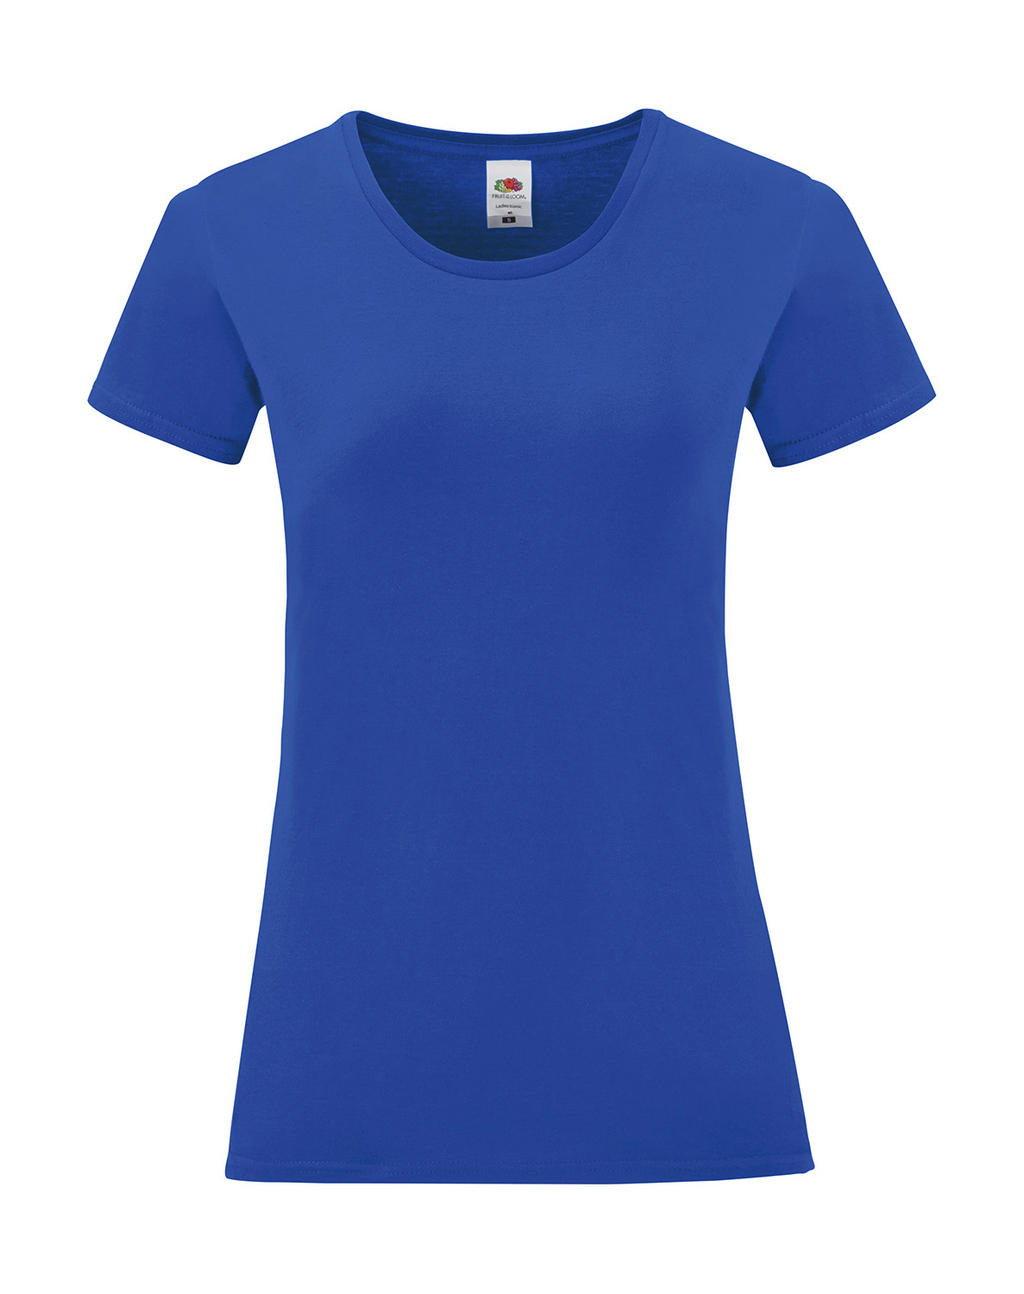  Ladies Iconic 150 T in Farbe Royal Blue